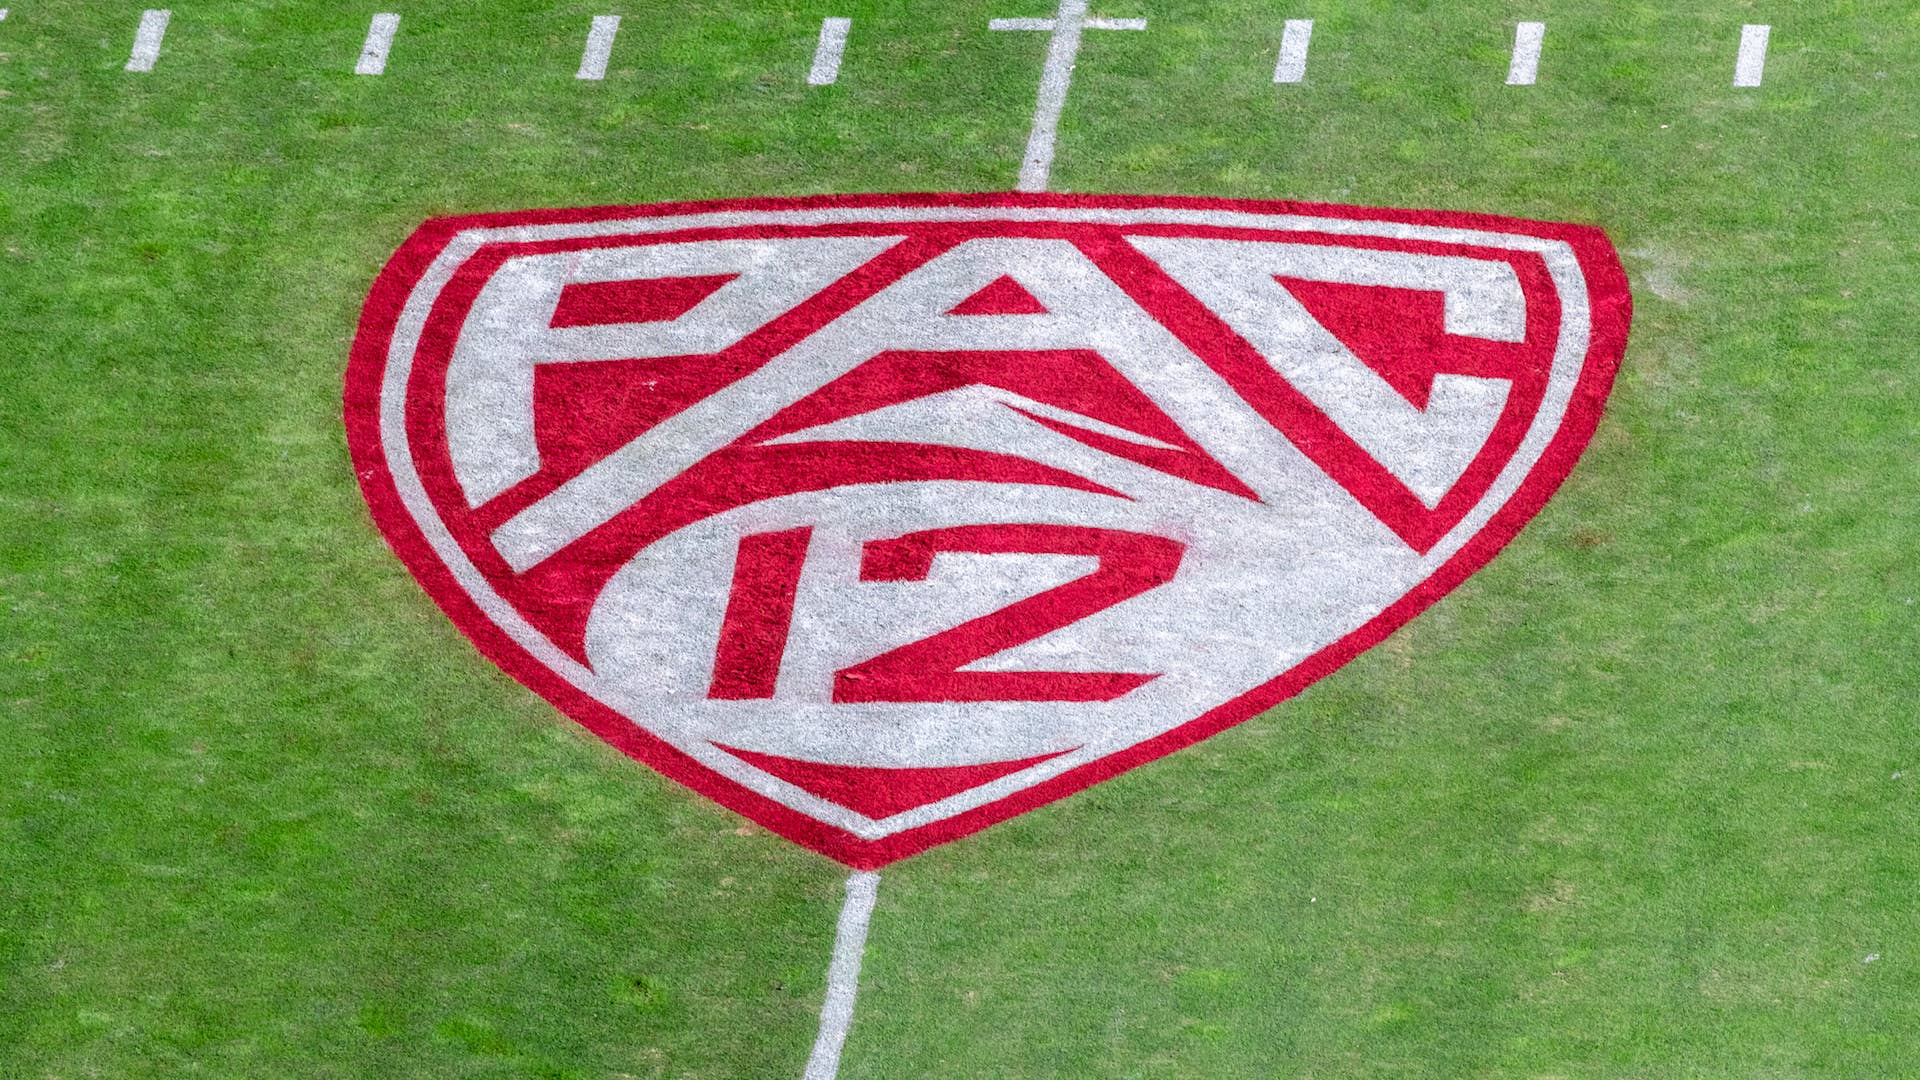 A detail view of the Pac 12 logo on the field at Stanford Stadium